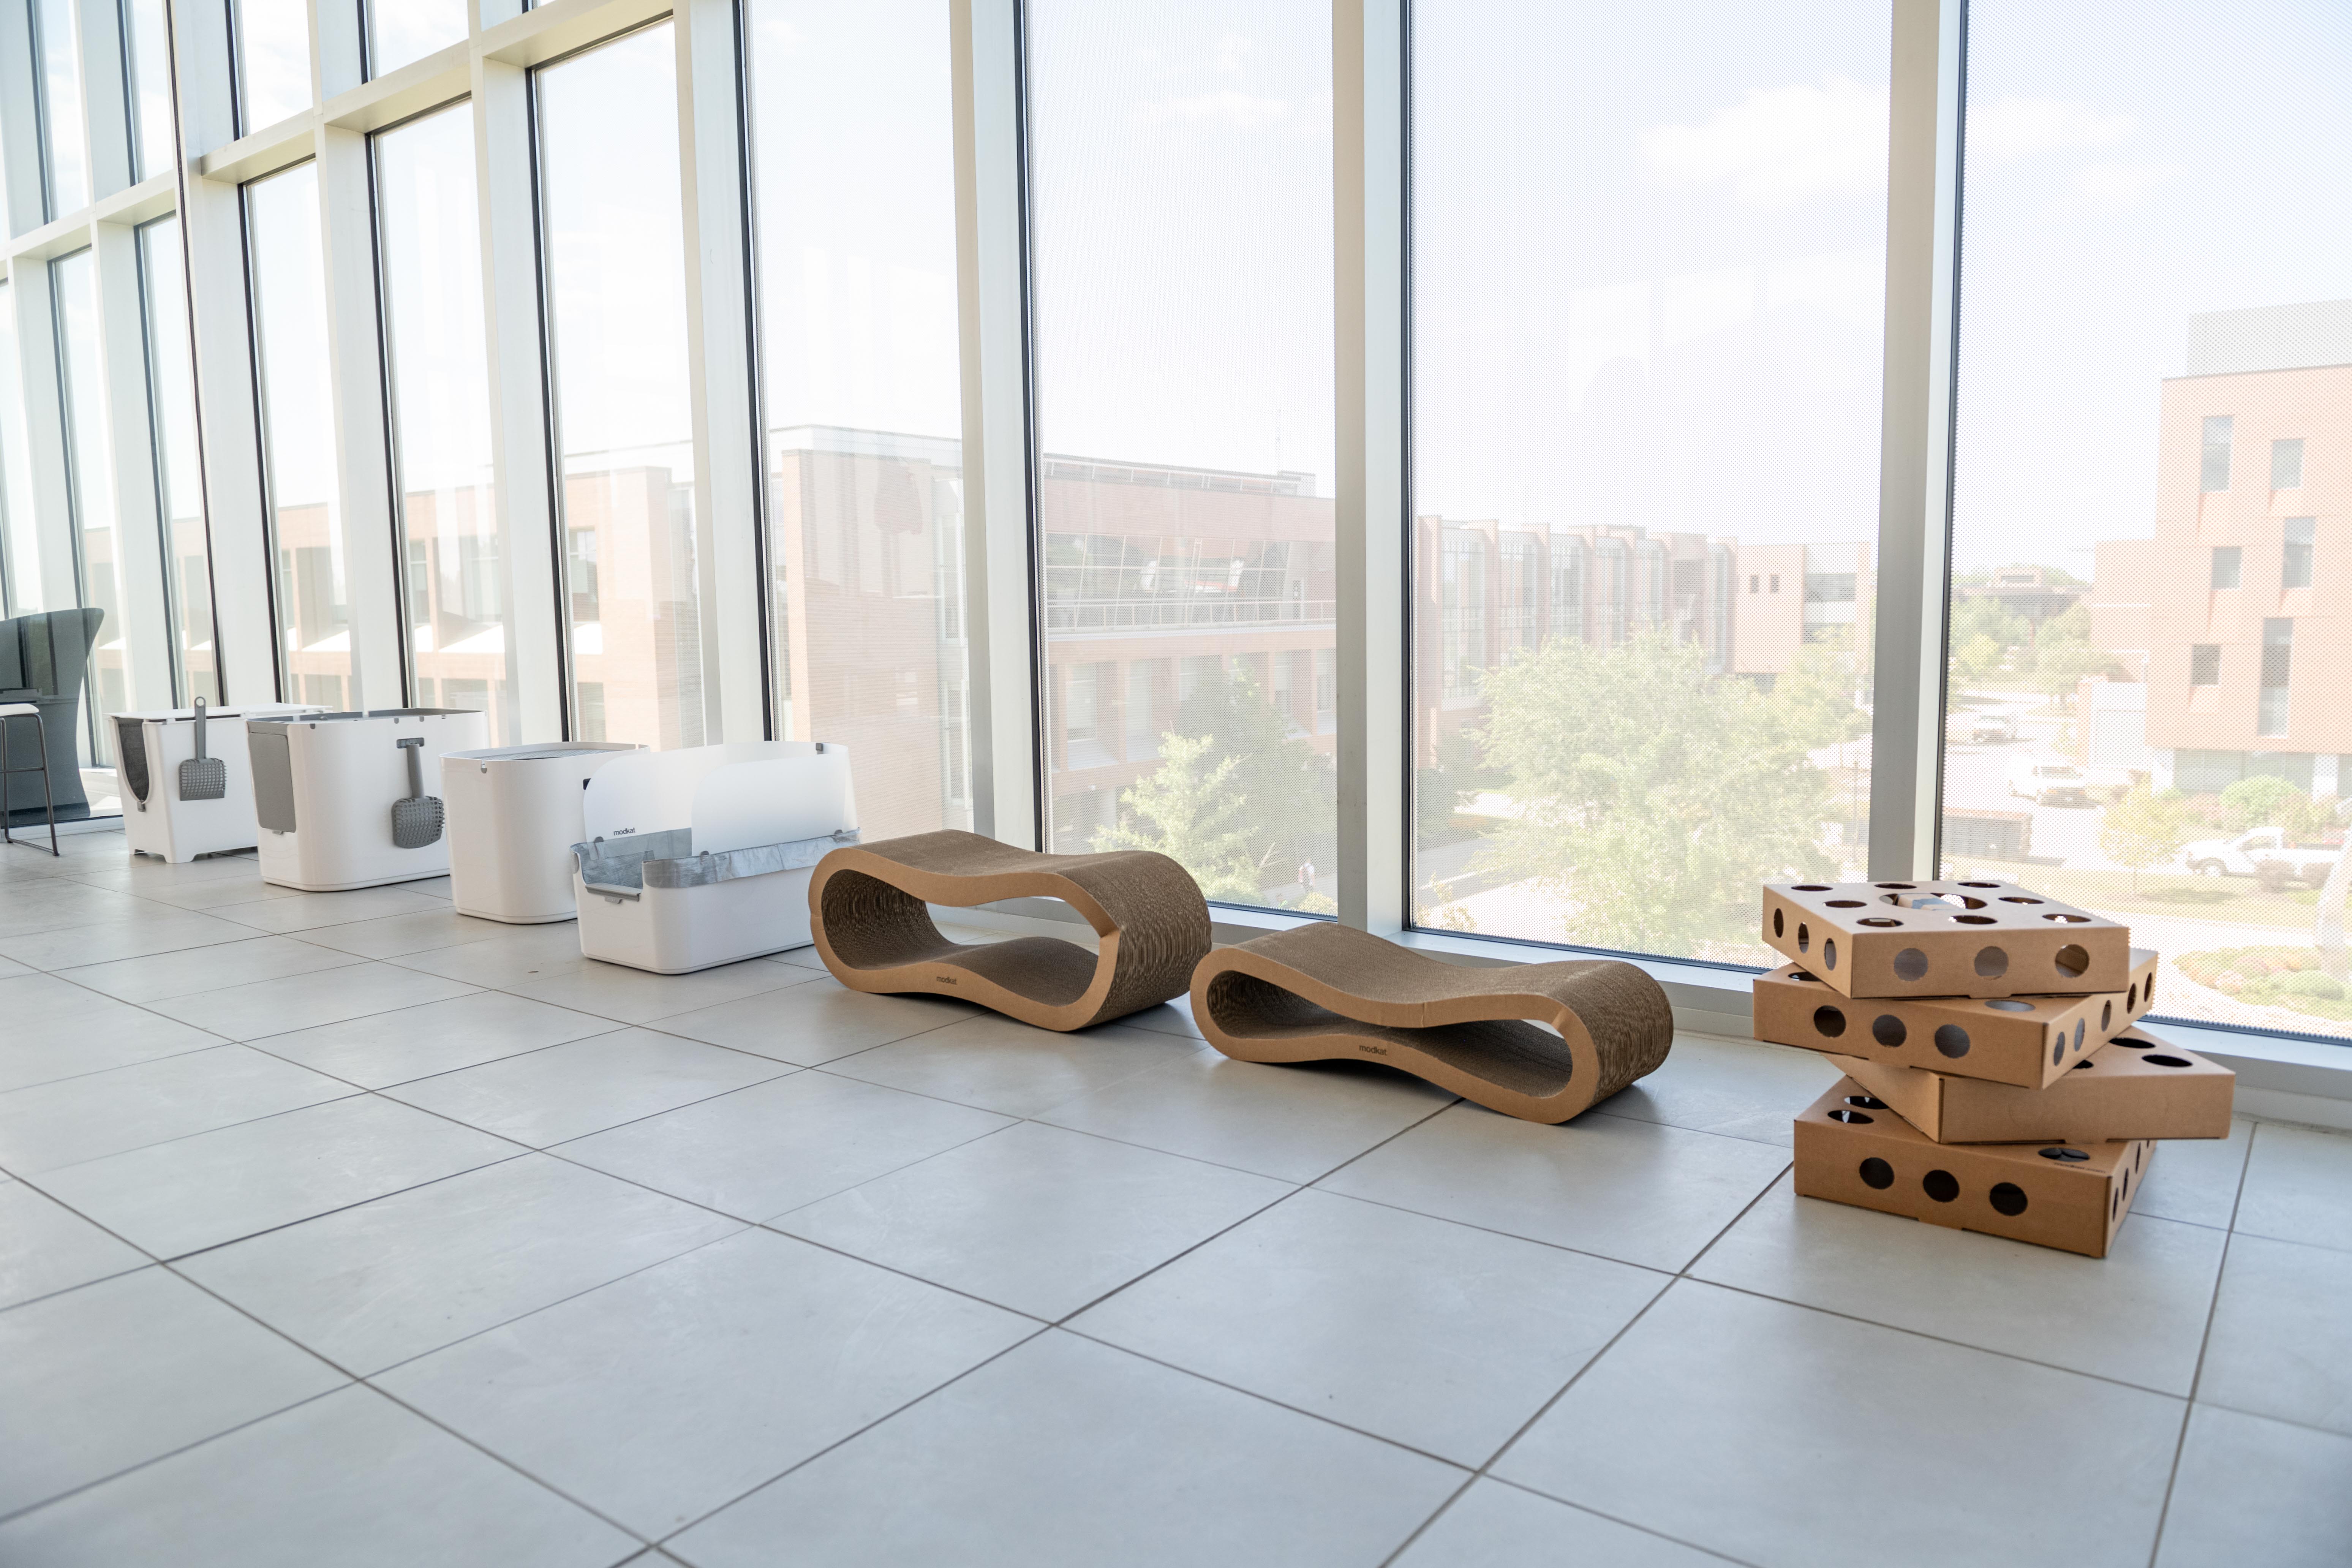 Modkat litter boxes line the wall of the Vignelli Center